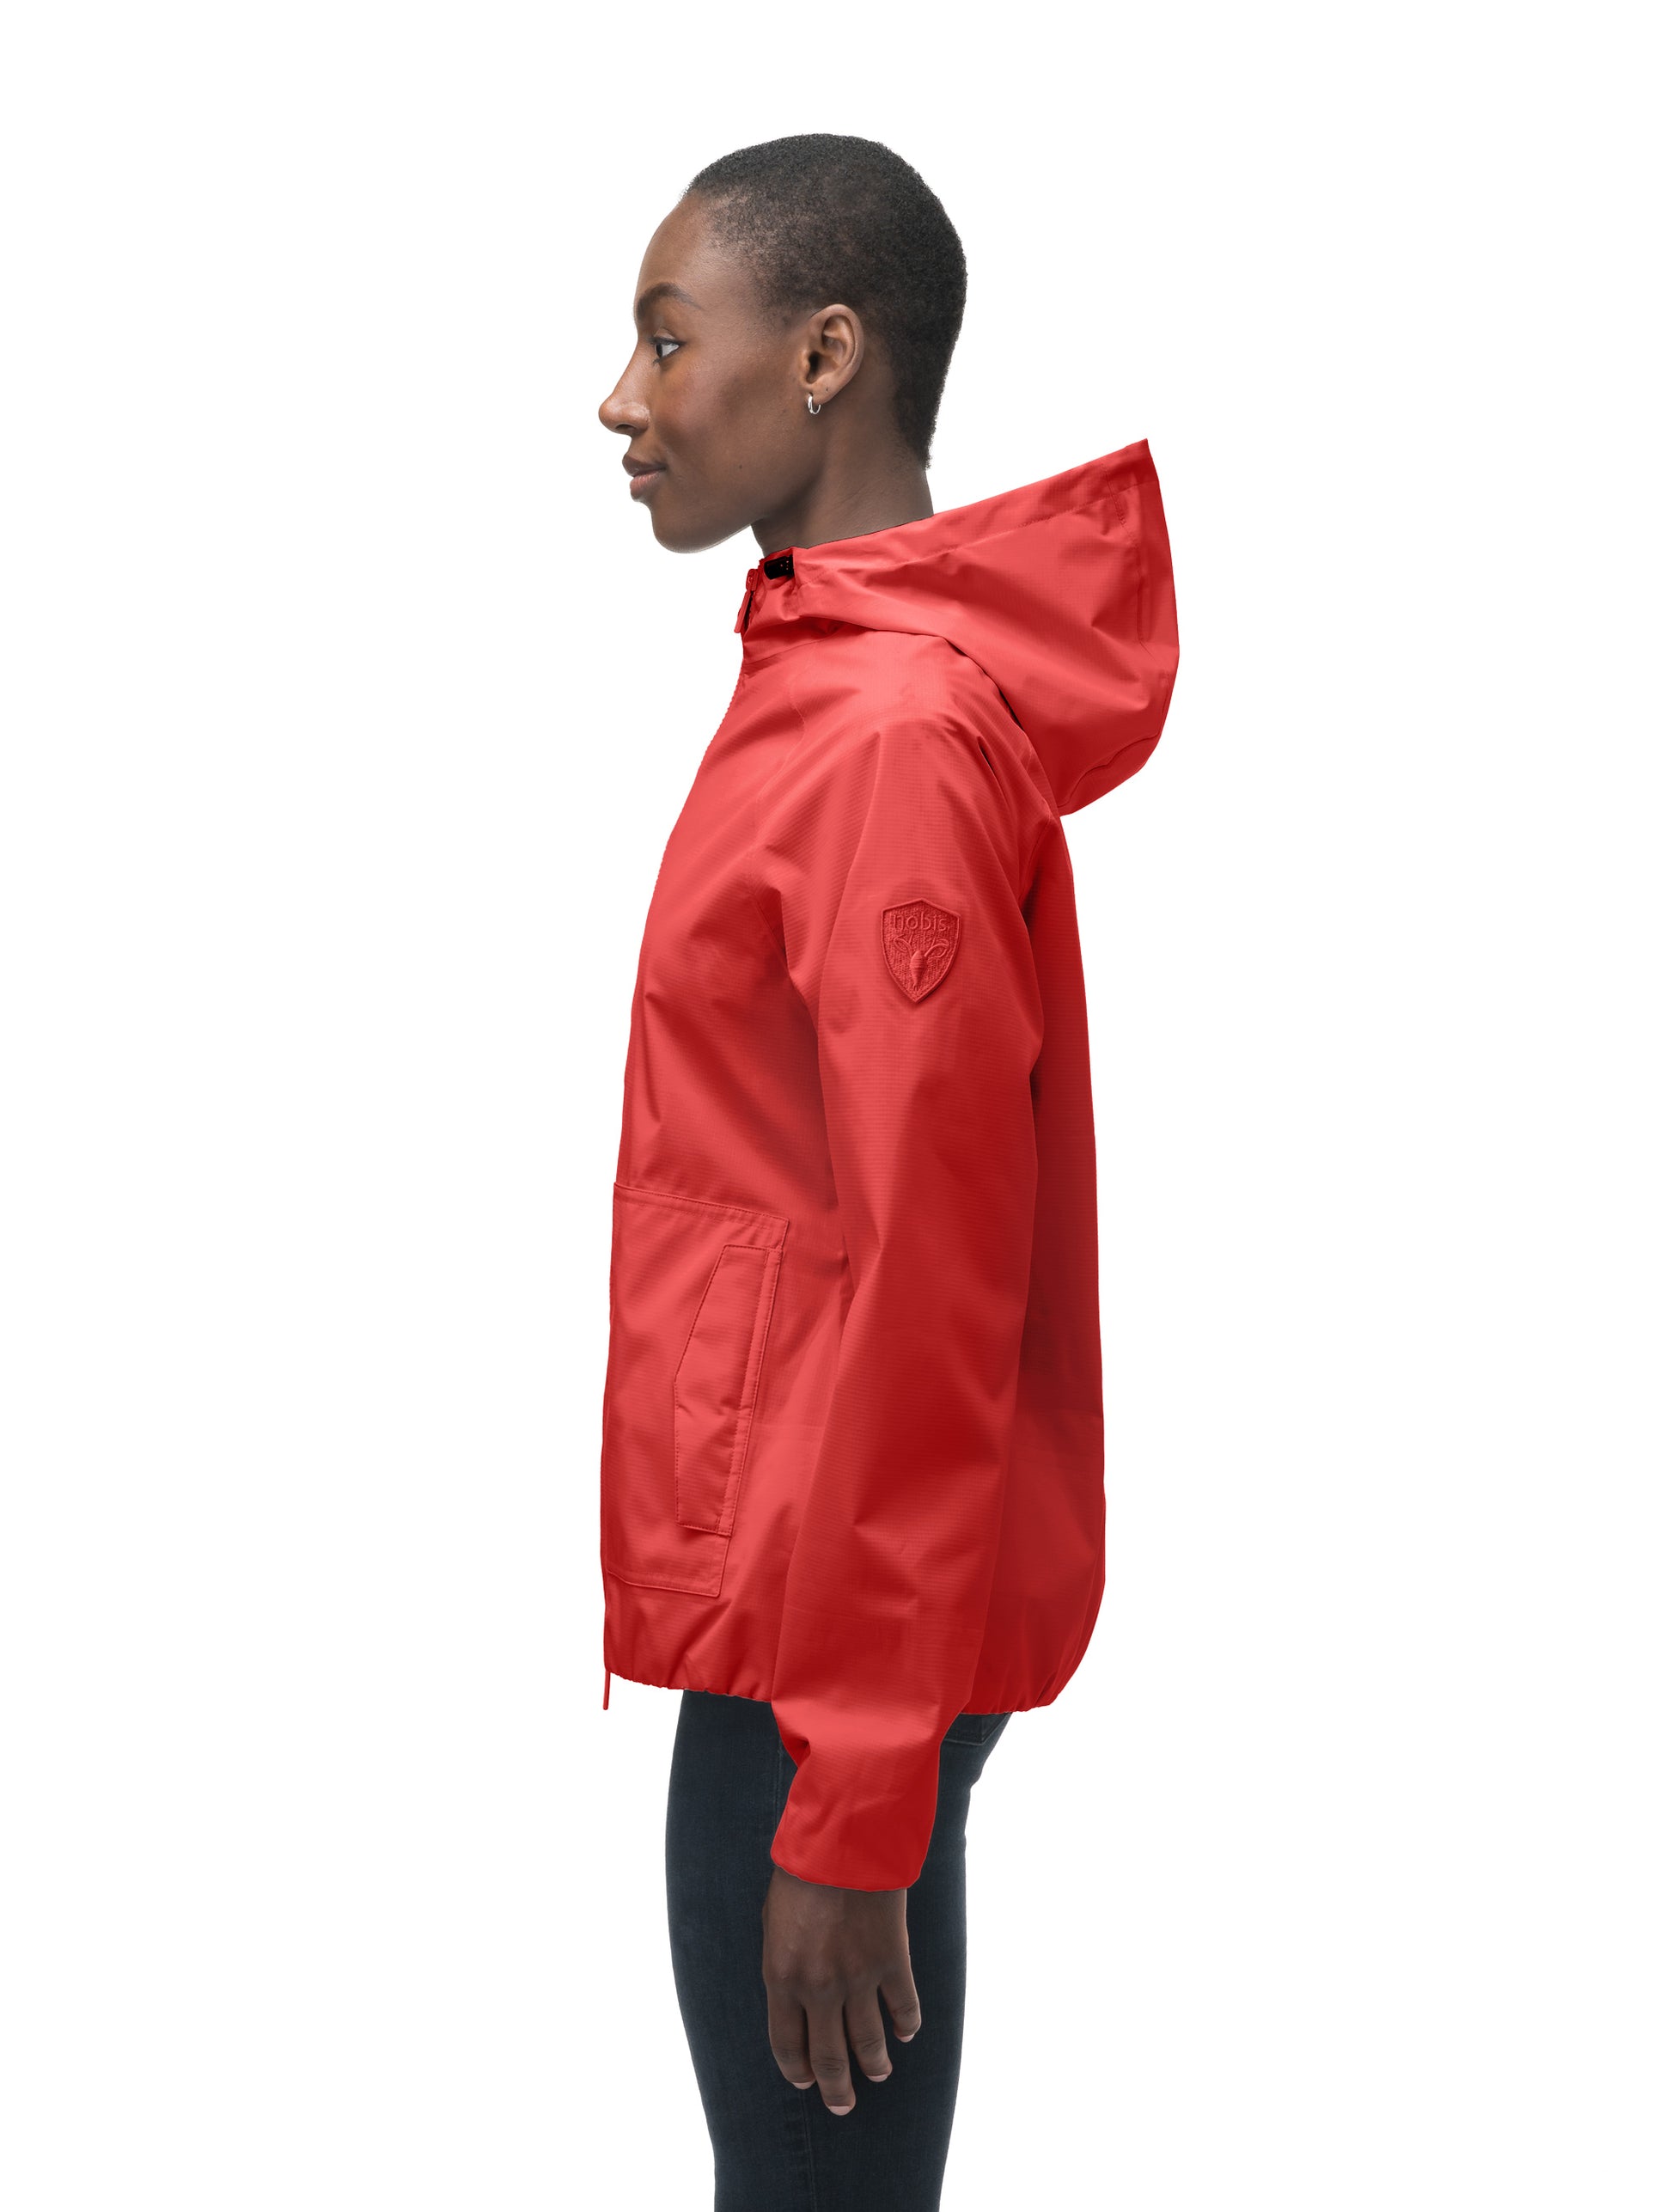 Women's hip length waterproof jacket with non-removable hood and two-way zipper in Vermillion